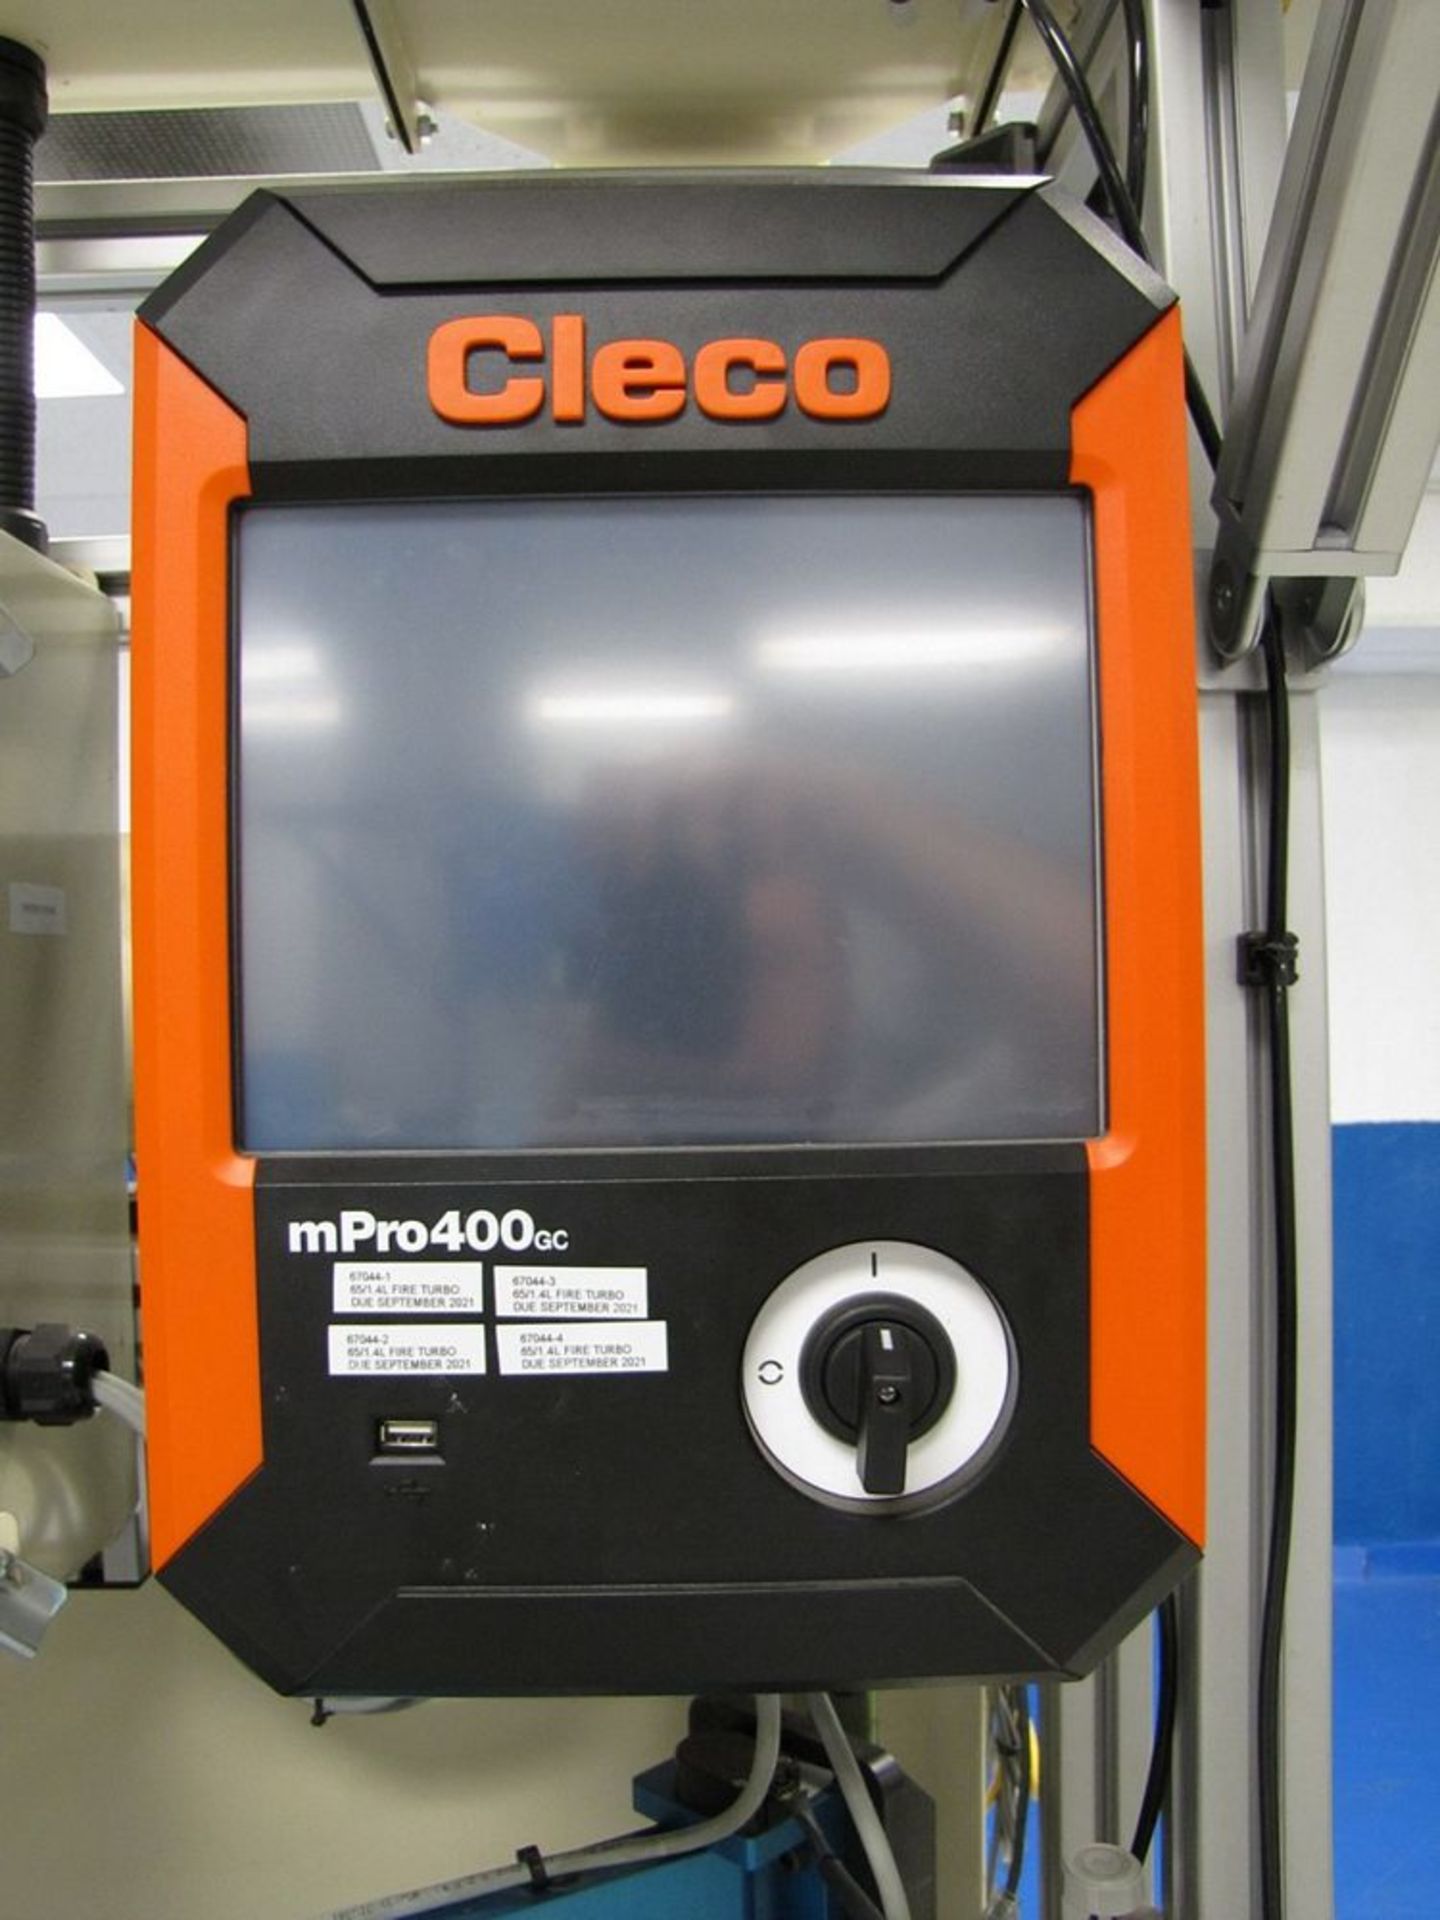 Test Station With Cleco Control - Image 3 of 3